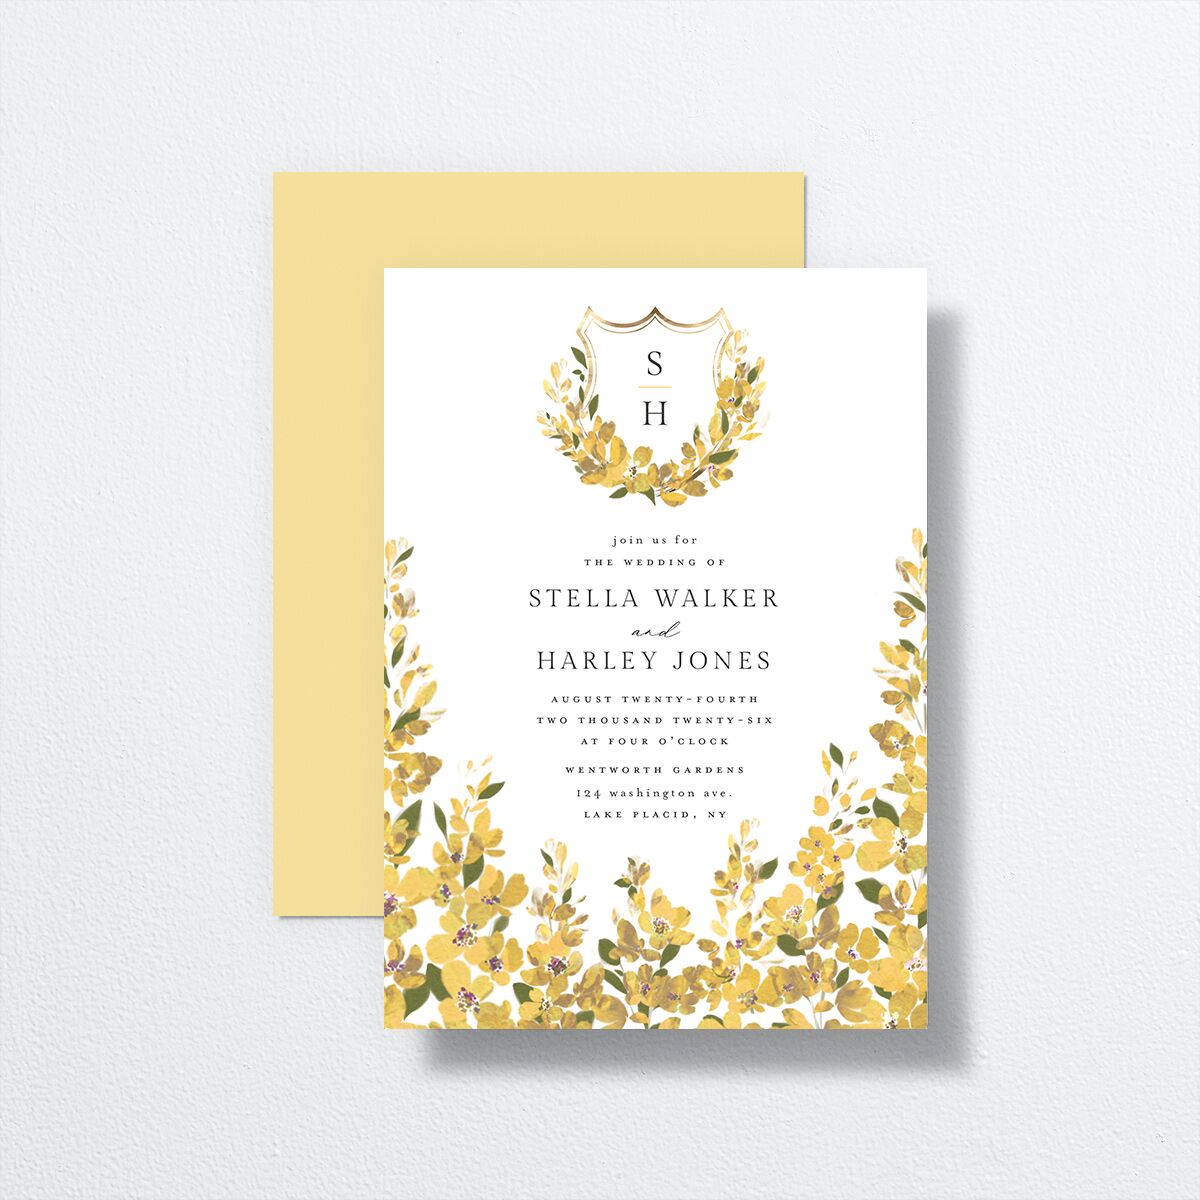 Delphinium Crest Wedding Invitations front-and-back in yellow